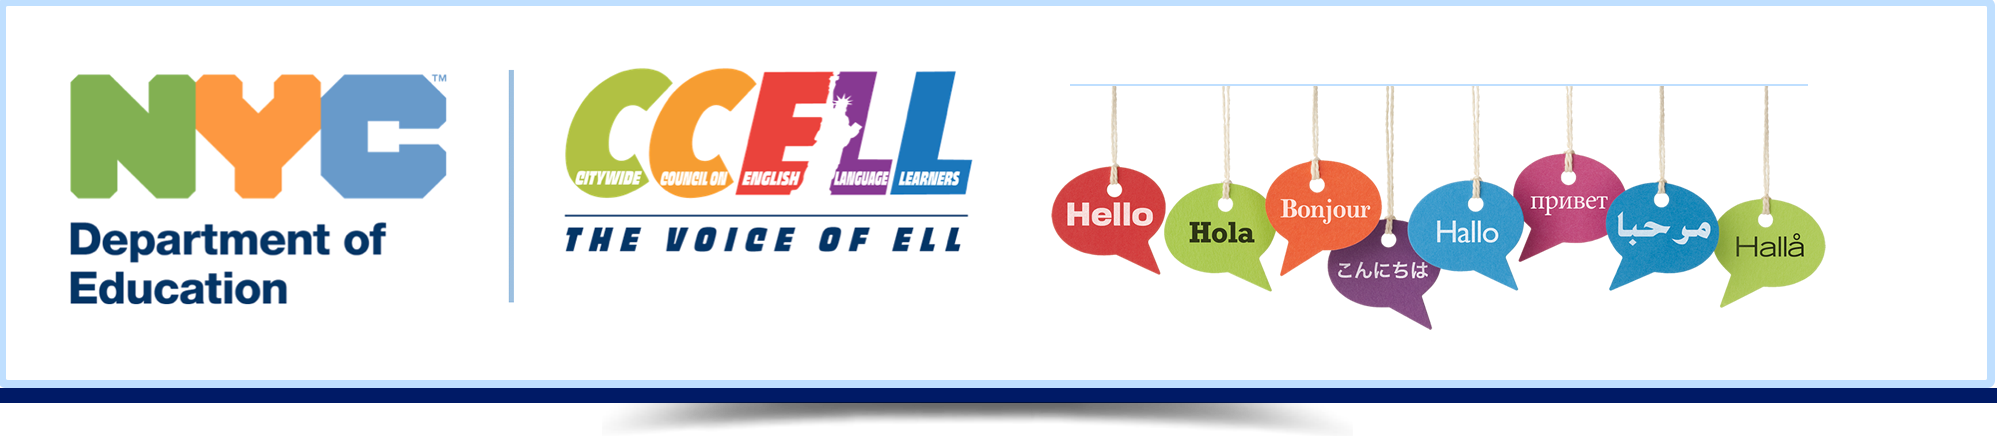 CCELL Banner